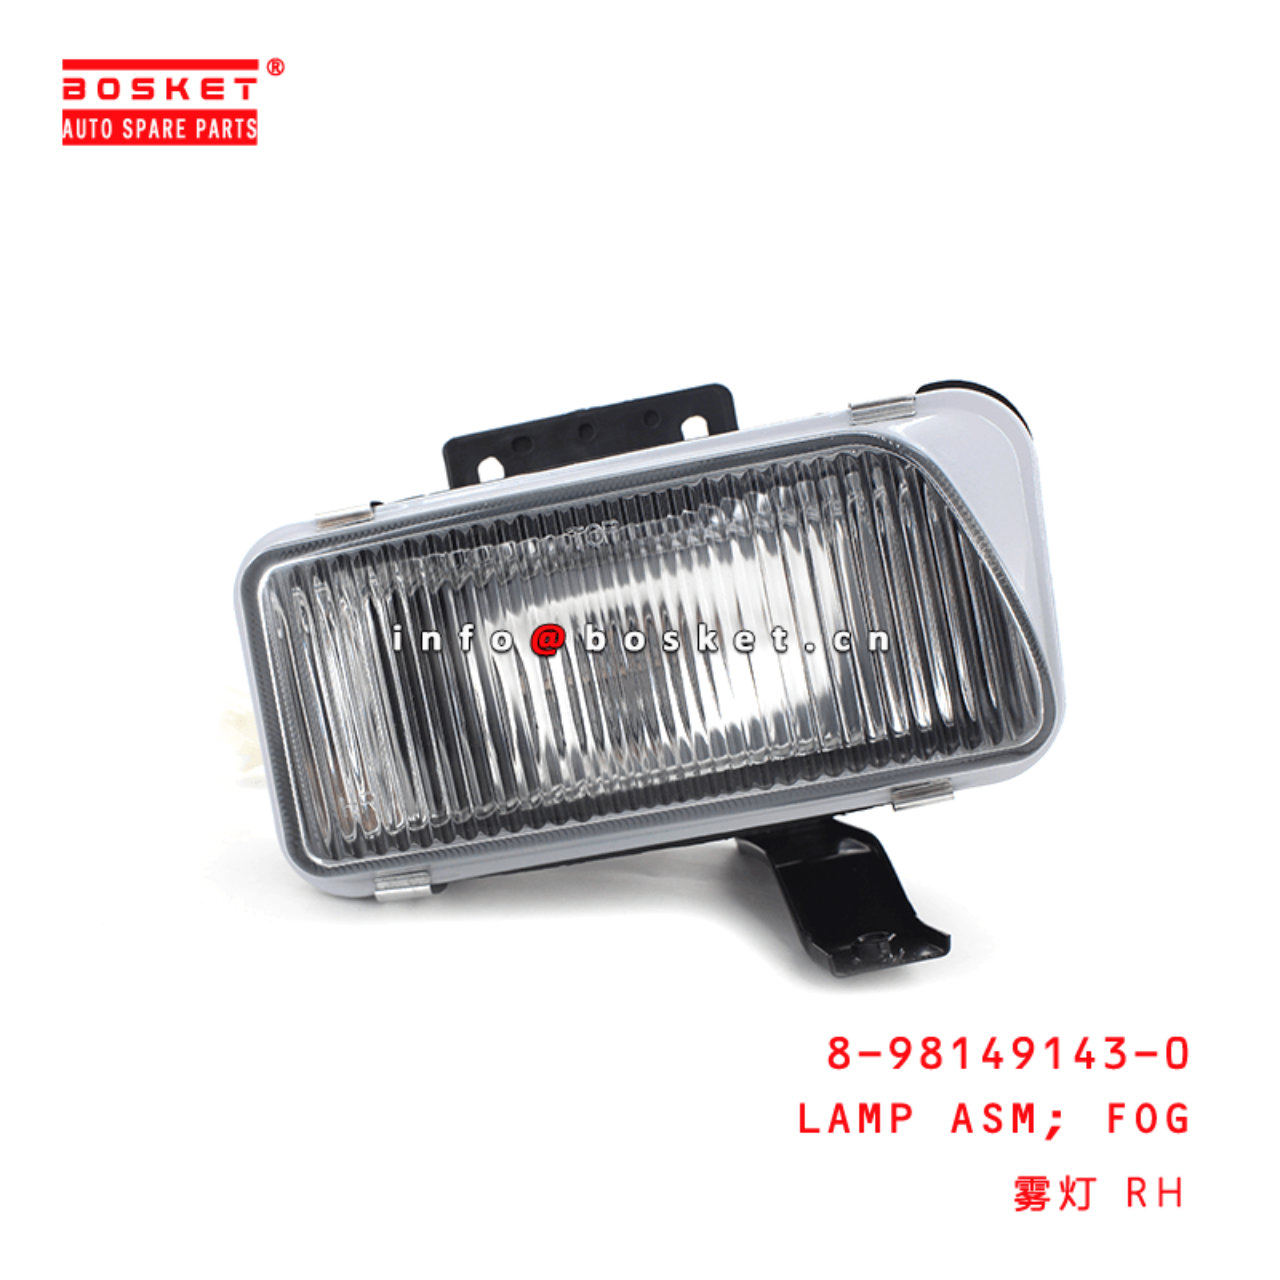 8-98149143-0 Fog Lamp Assembly 8981491430 Suitable for ISUZU 700P